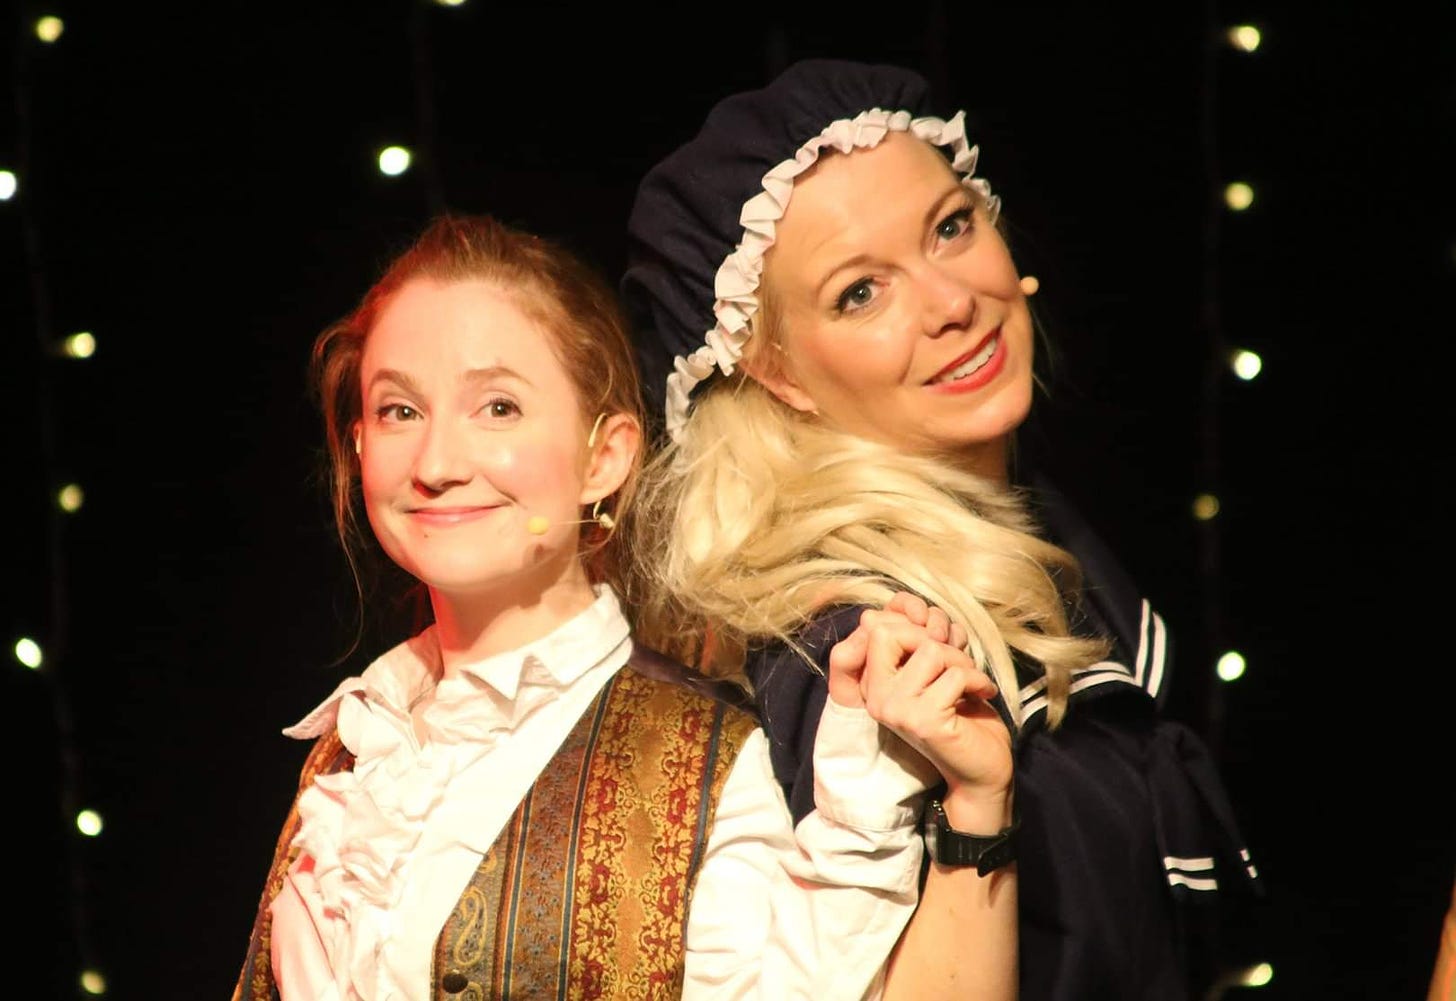 Two women stand back to back in panto costumes. Small red head dressed as a panto style lead boy and a woman with blonde hair dressed in a maid outfit